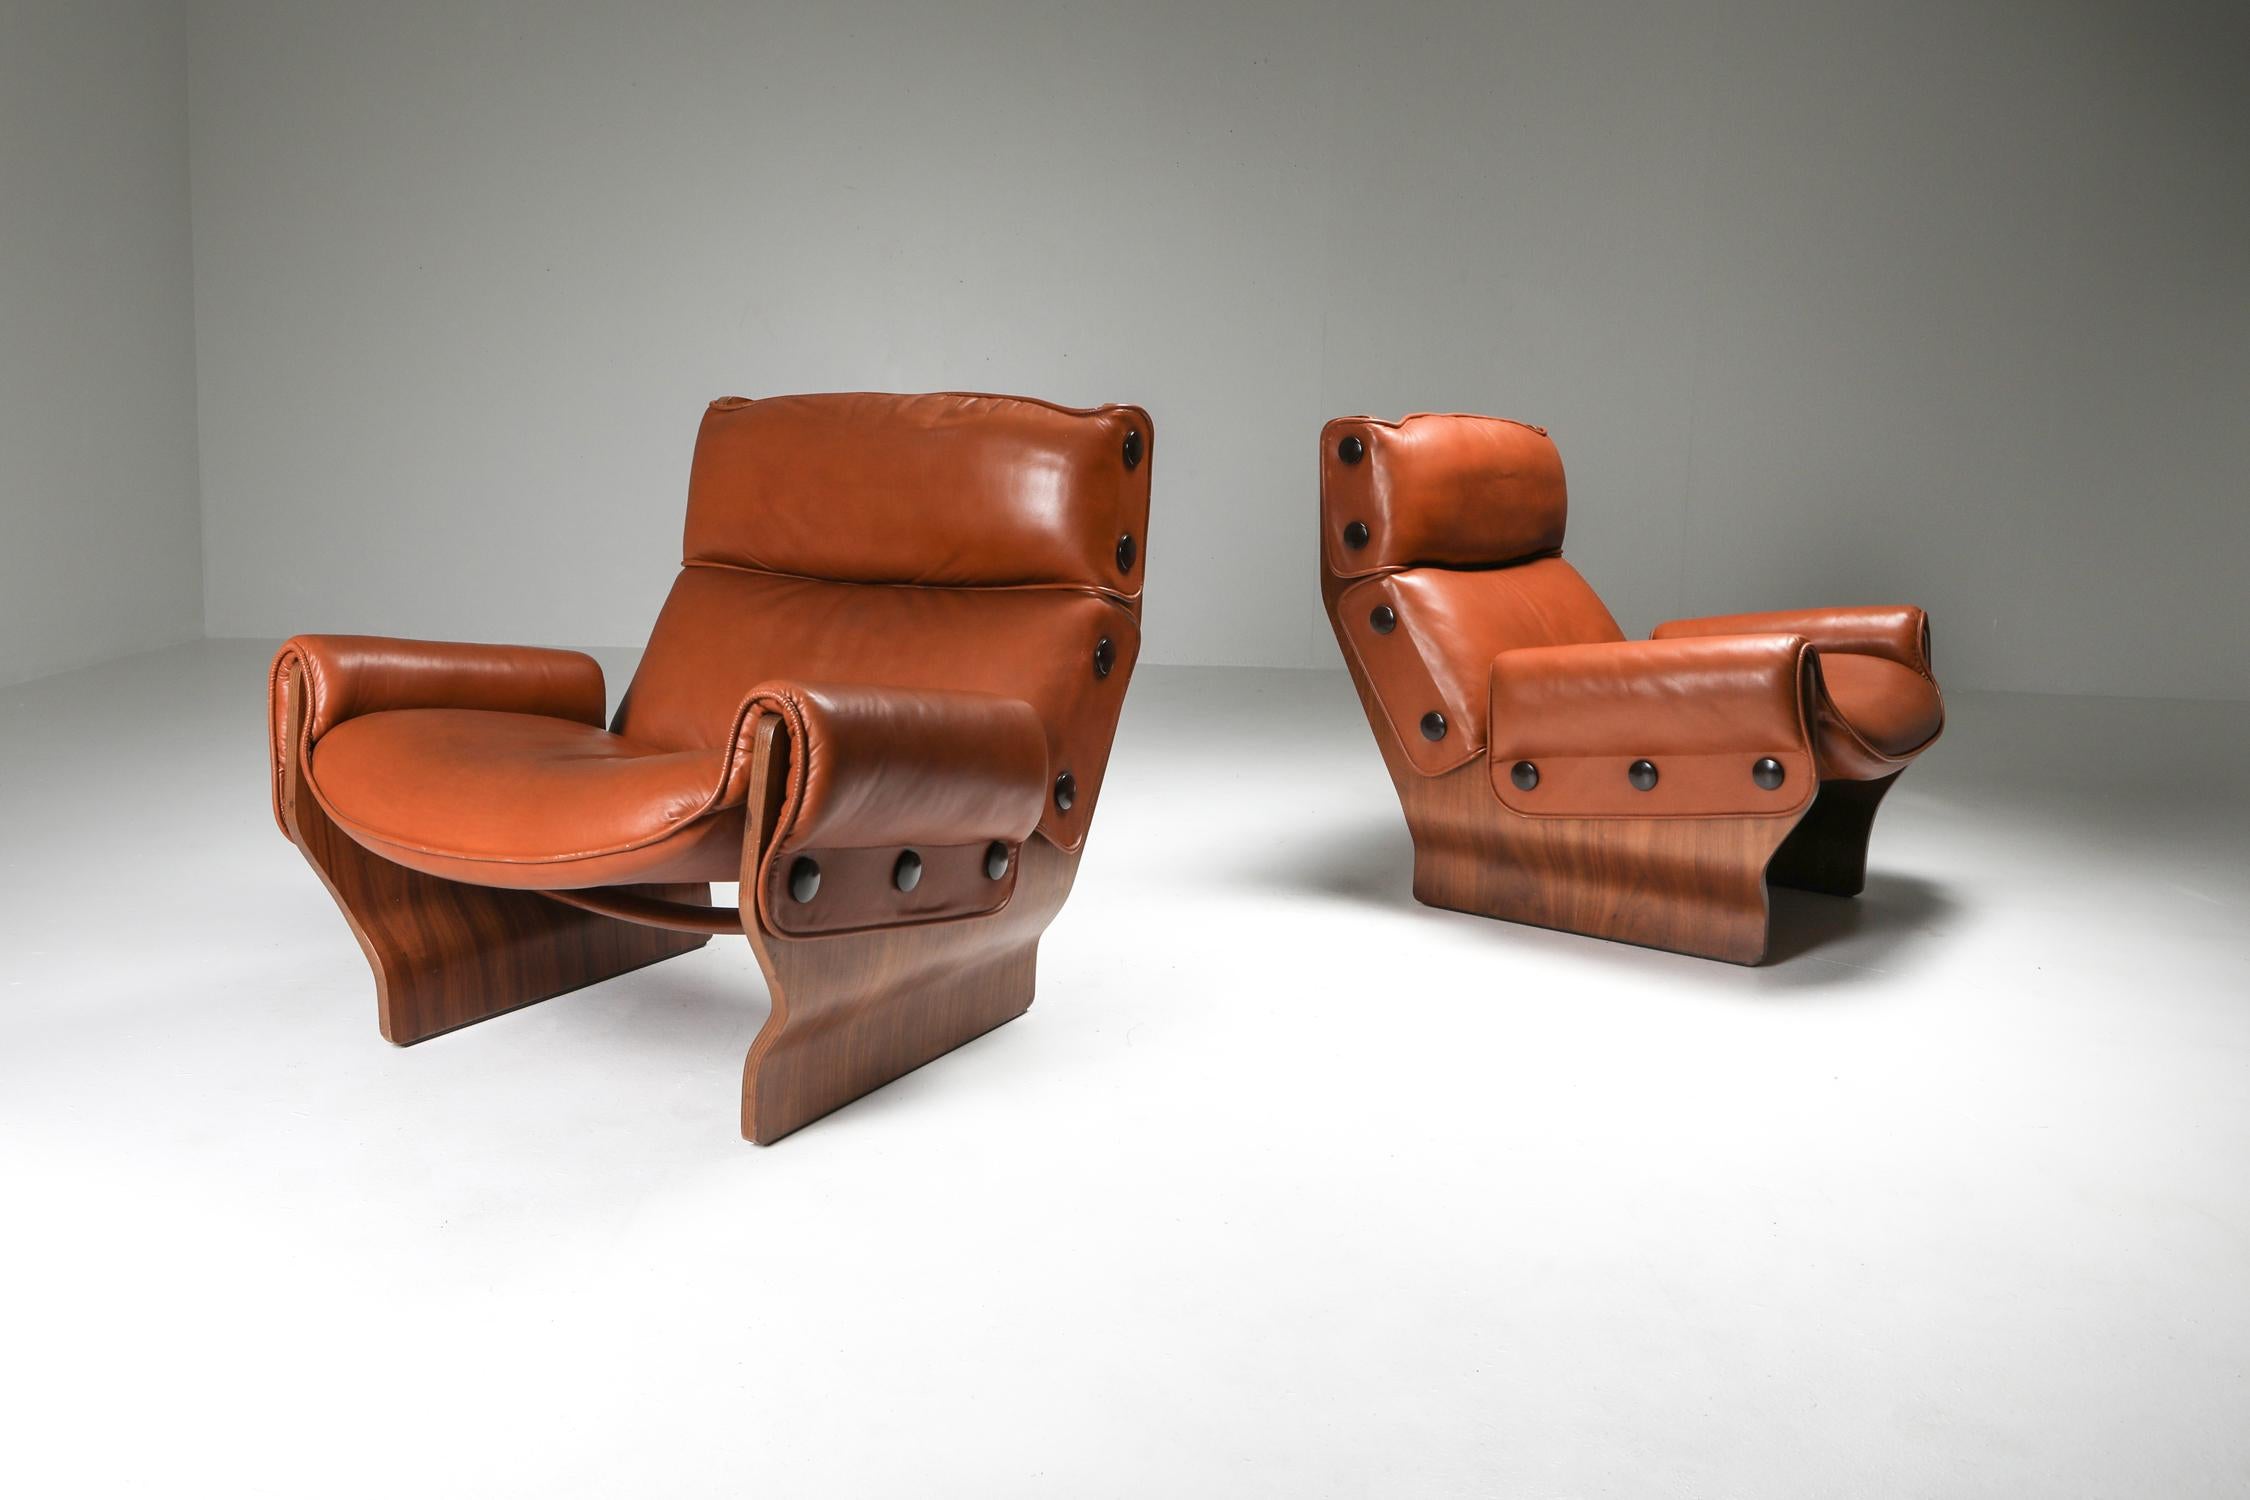 Osvaldo Borsani, P110 'Canada' armchair, Tecno, Italy, 1960s

Wooden frame with original cognac leather upholstery in very good condition
Borsani designed this bold lounge chair in 1965 part of the 'slender line', it is a smart knock down